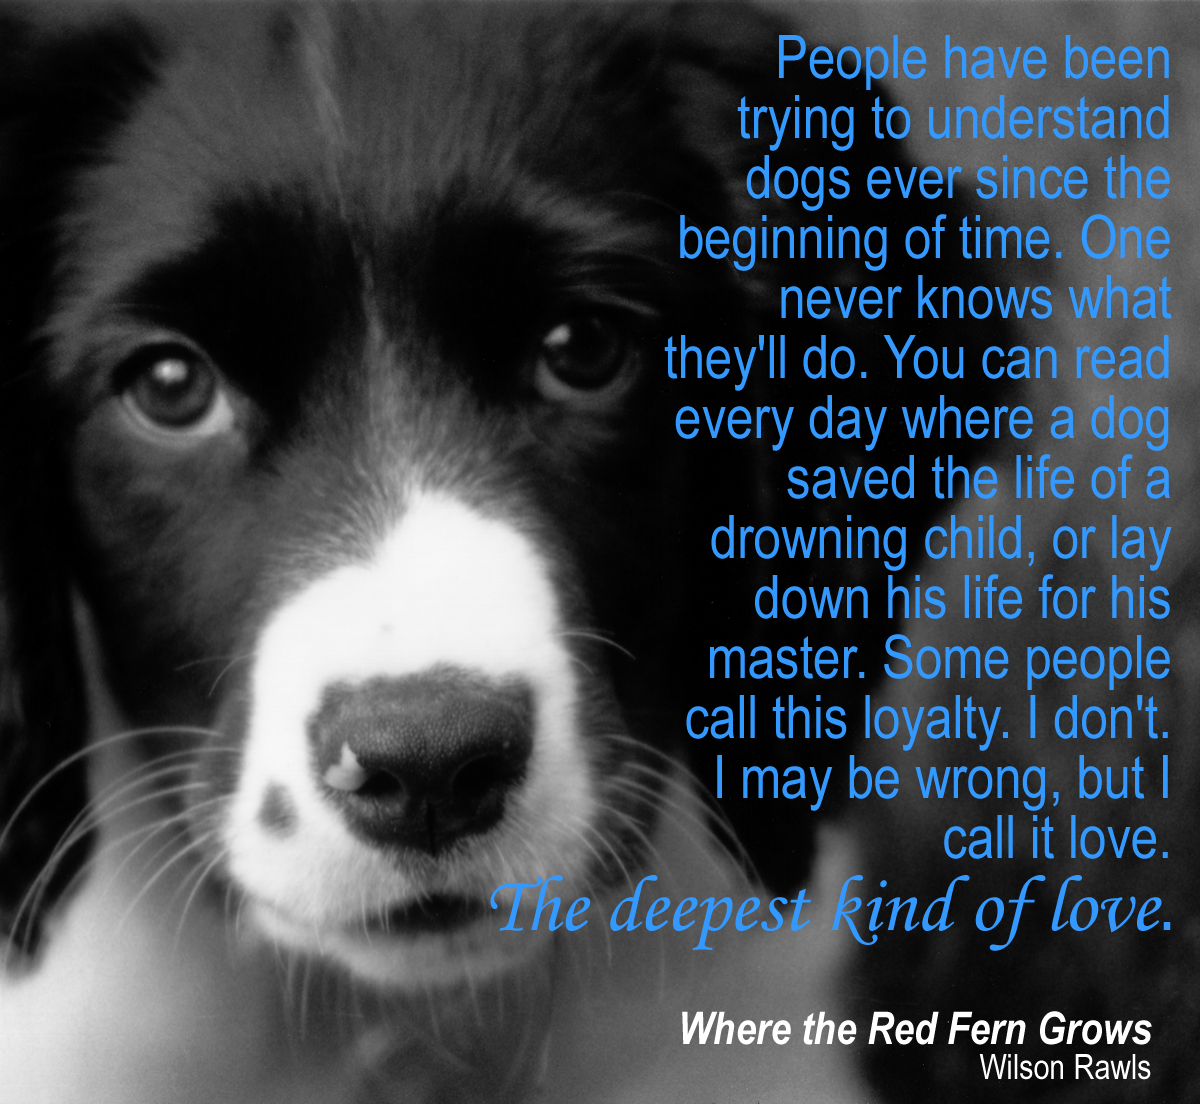 Where the Red Fern Grows Quote